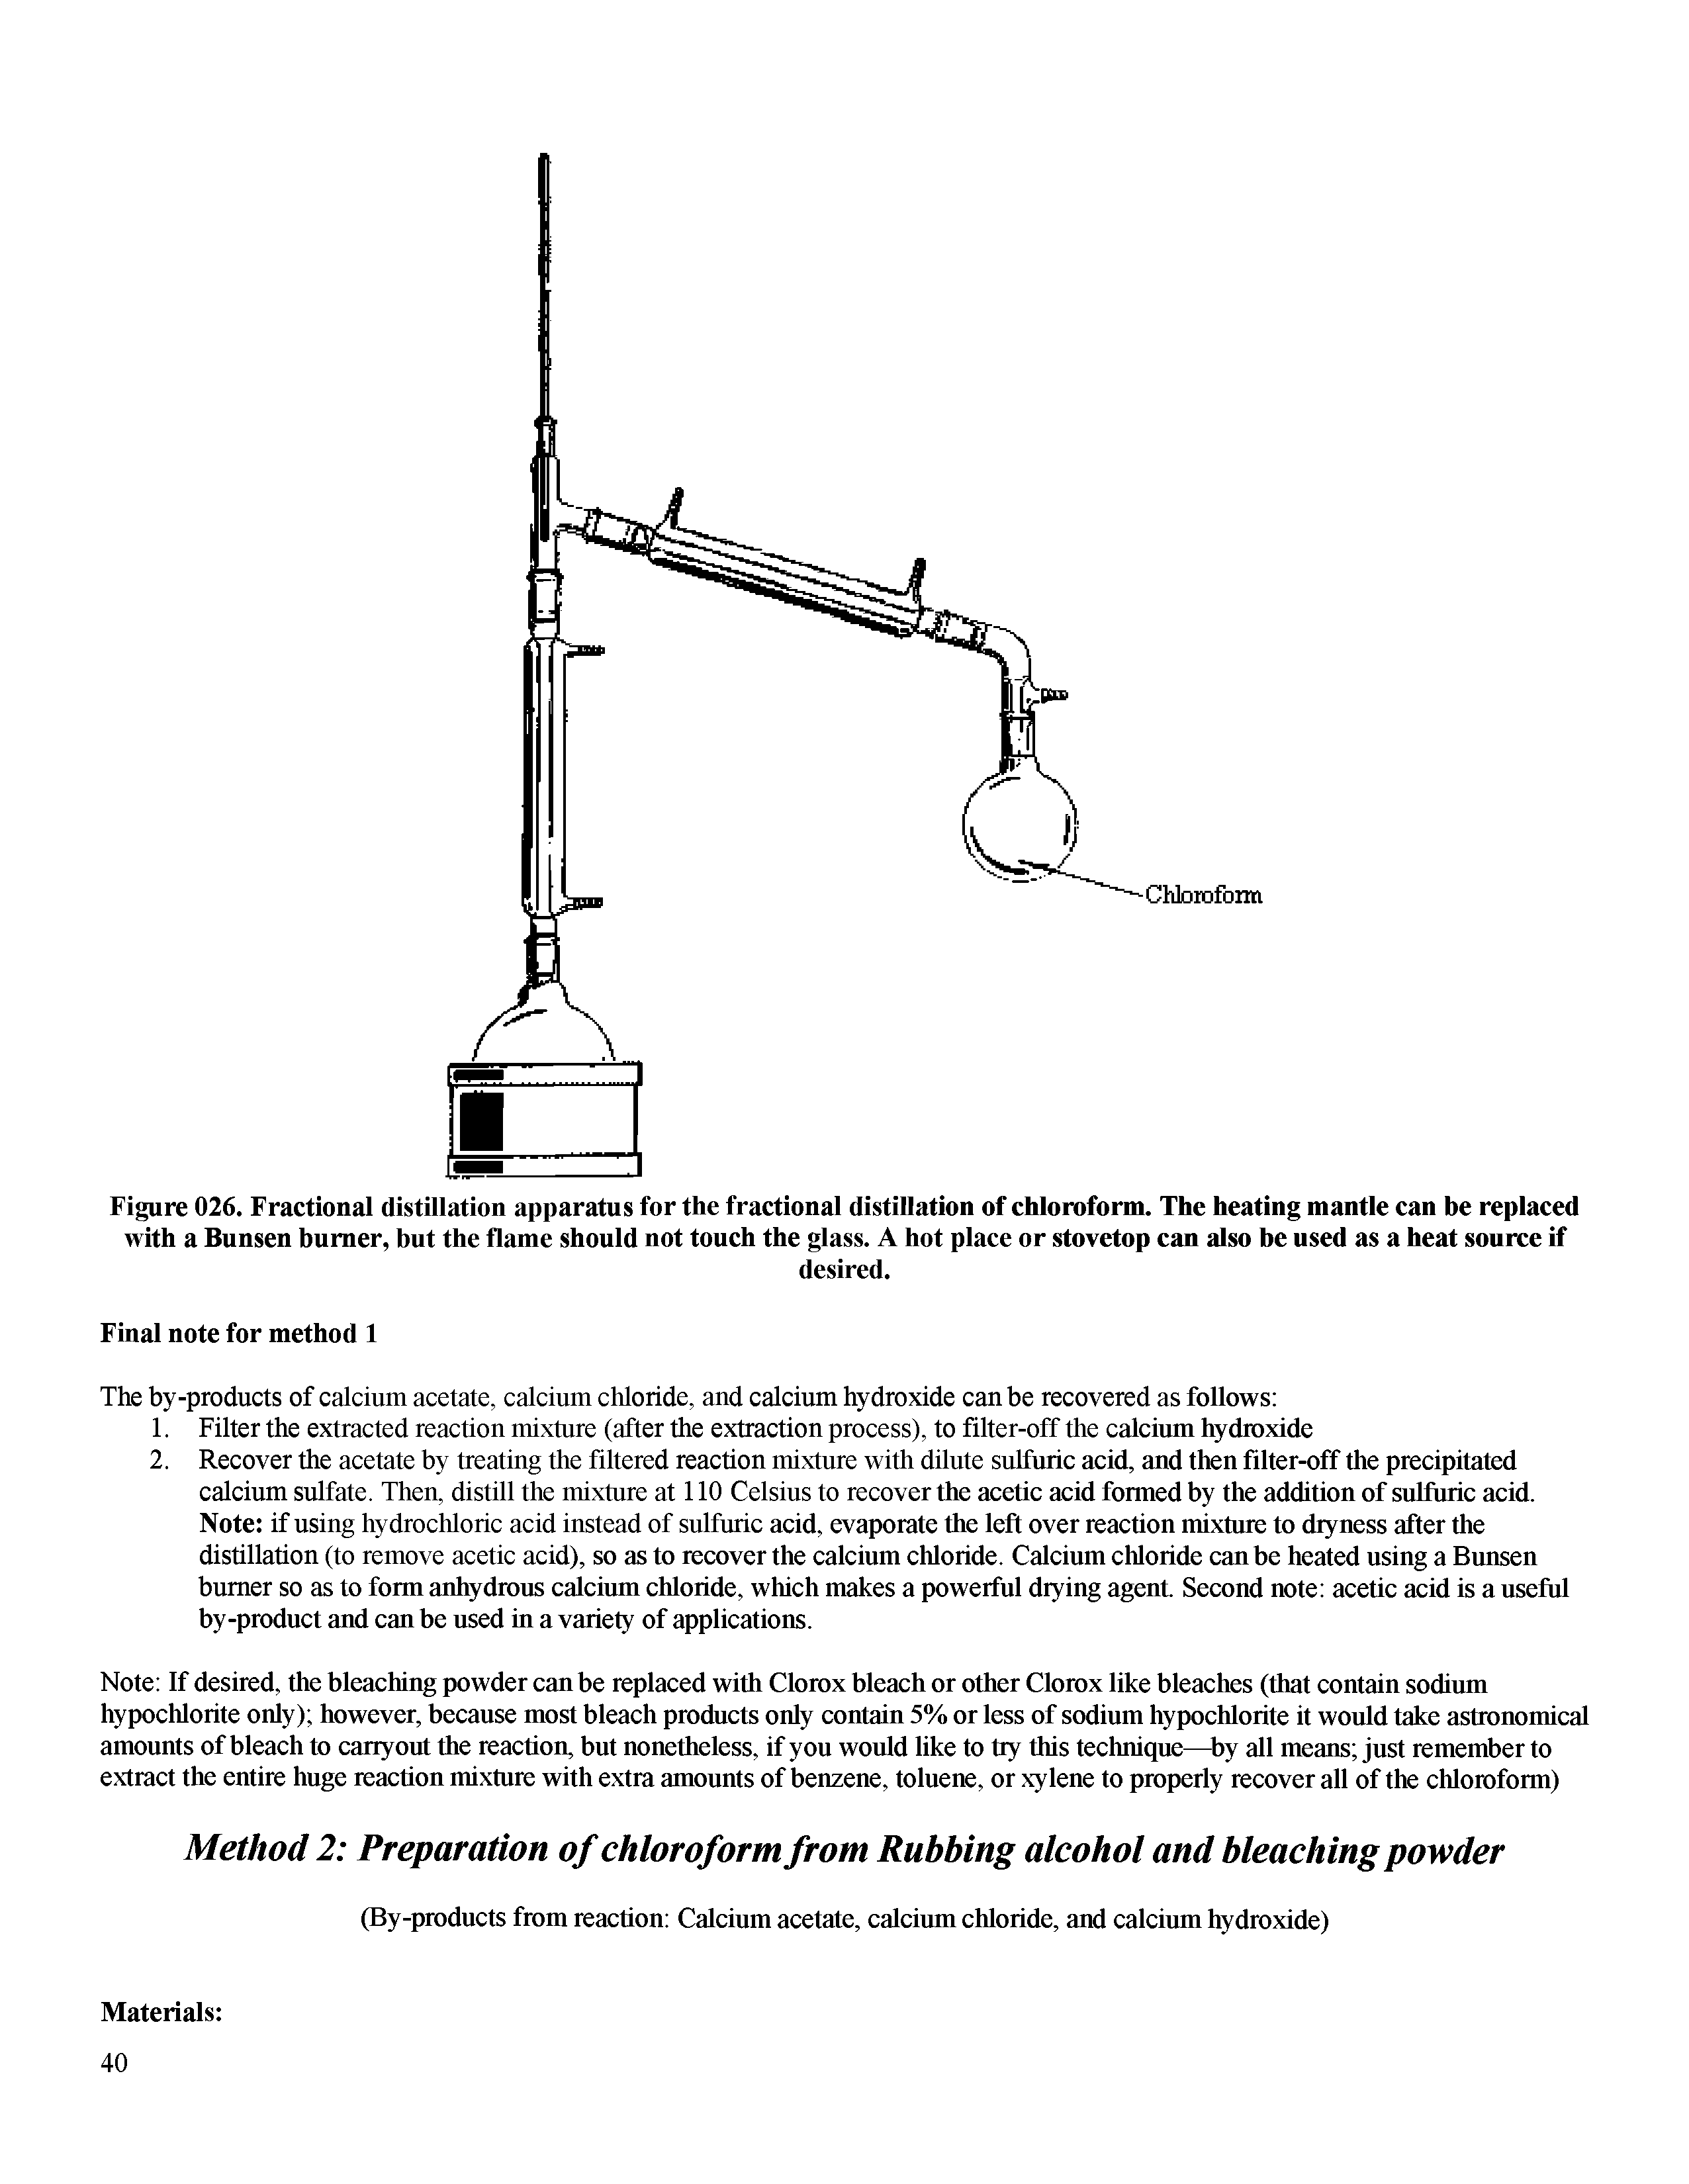 Figure 026. Fractional distillation apparatus for the fractional distillation of chloroform. The heating mantle can be replaced with a Bunsen burner, but the flame should not touch the glass. A hot place or stovetop can also be used as a heat source if...